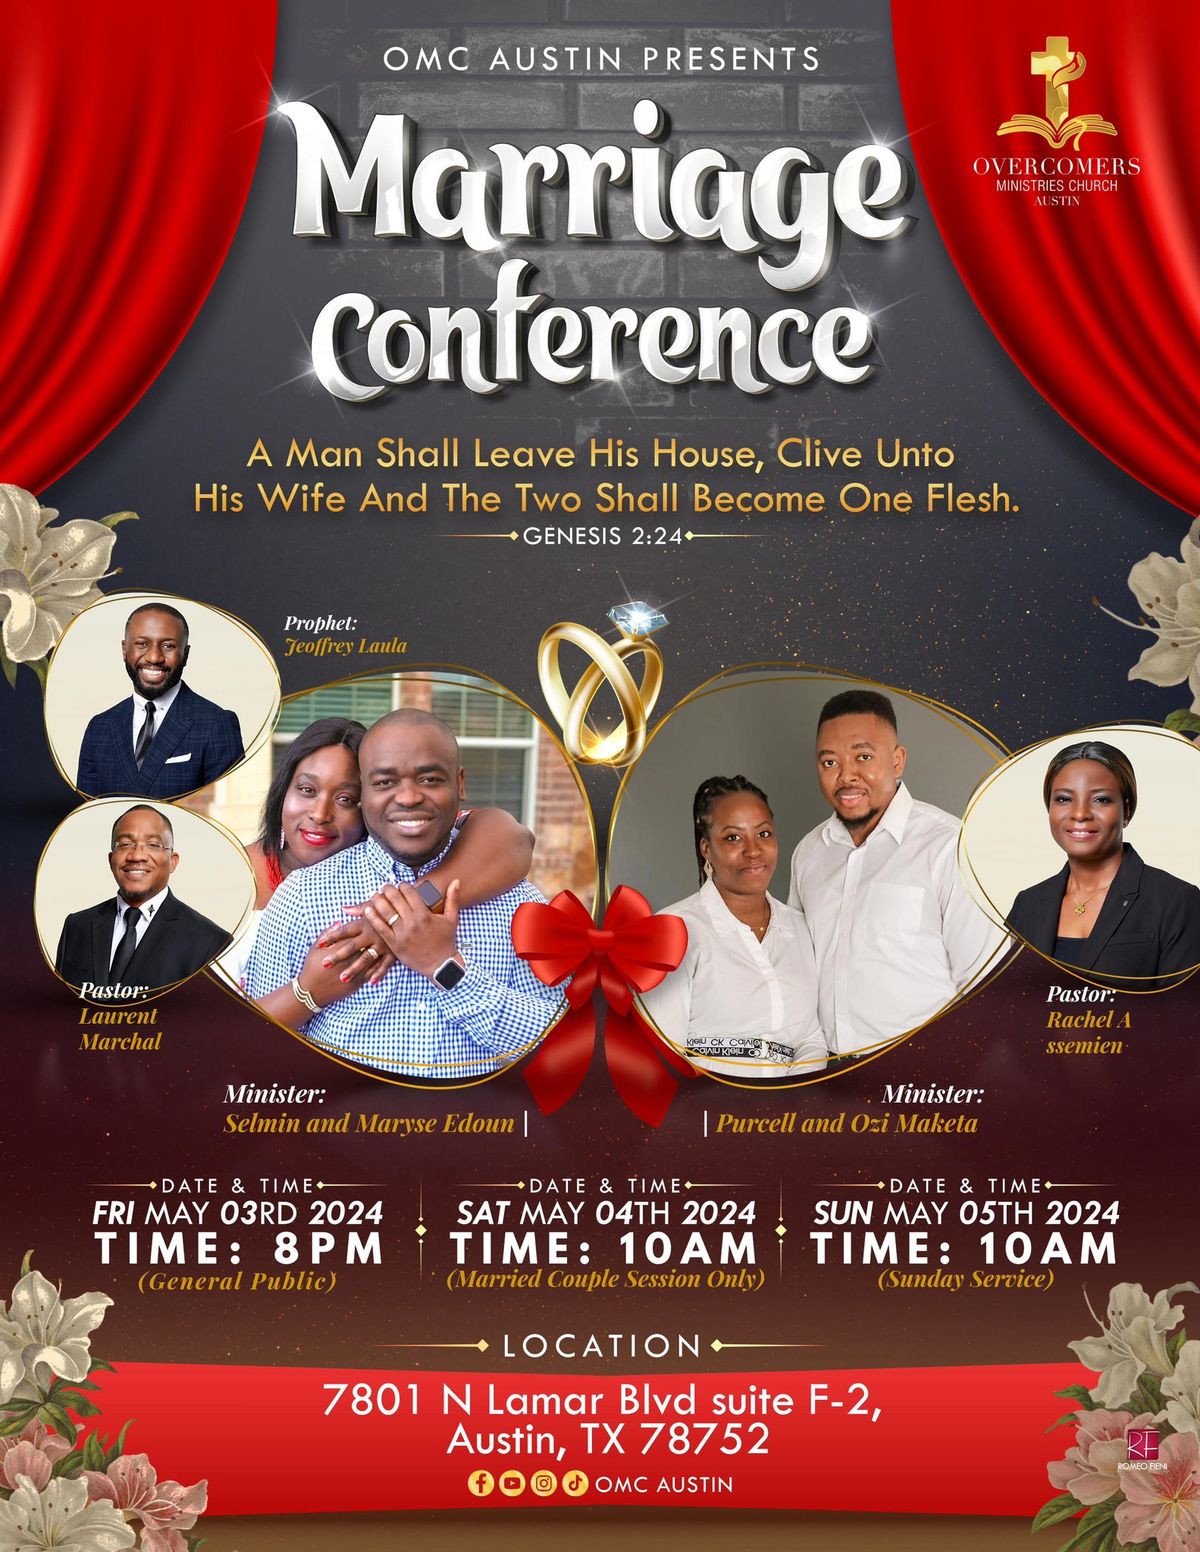 OMC Austin 4th Annual Marriage Conference